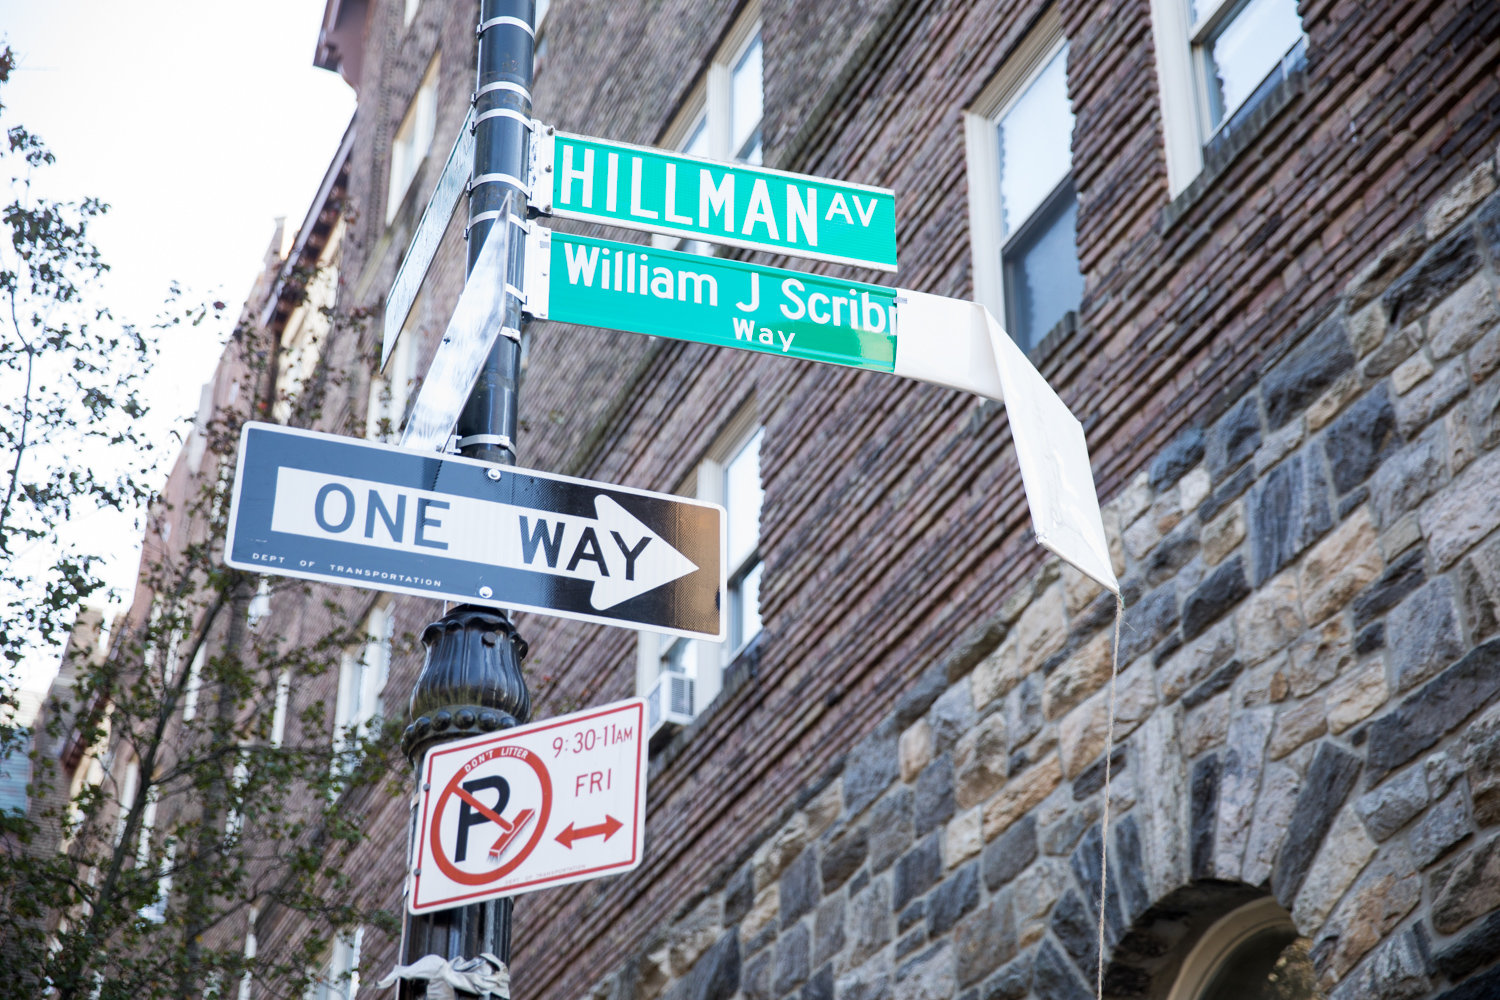 The sign for William J. Scribner Way is unveiled during a Nov. 15 ceremony. The corner of Hillman Avenue and Van Cortlandt Park South is named for the late founder of the Bronx Arts Ensemble, which is headquartered nearby.